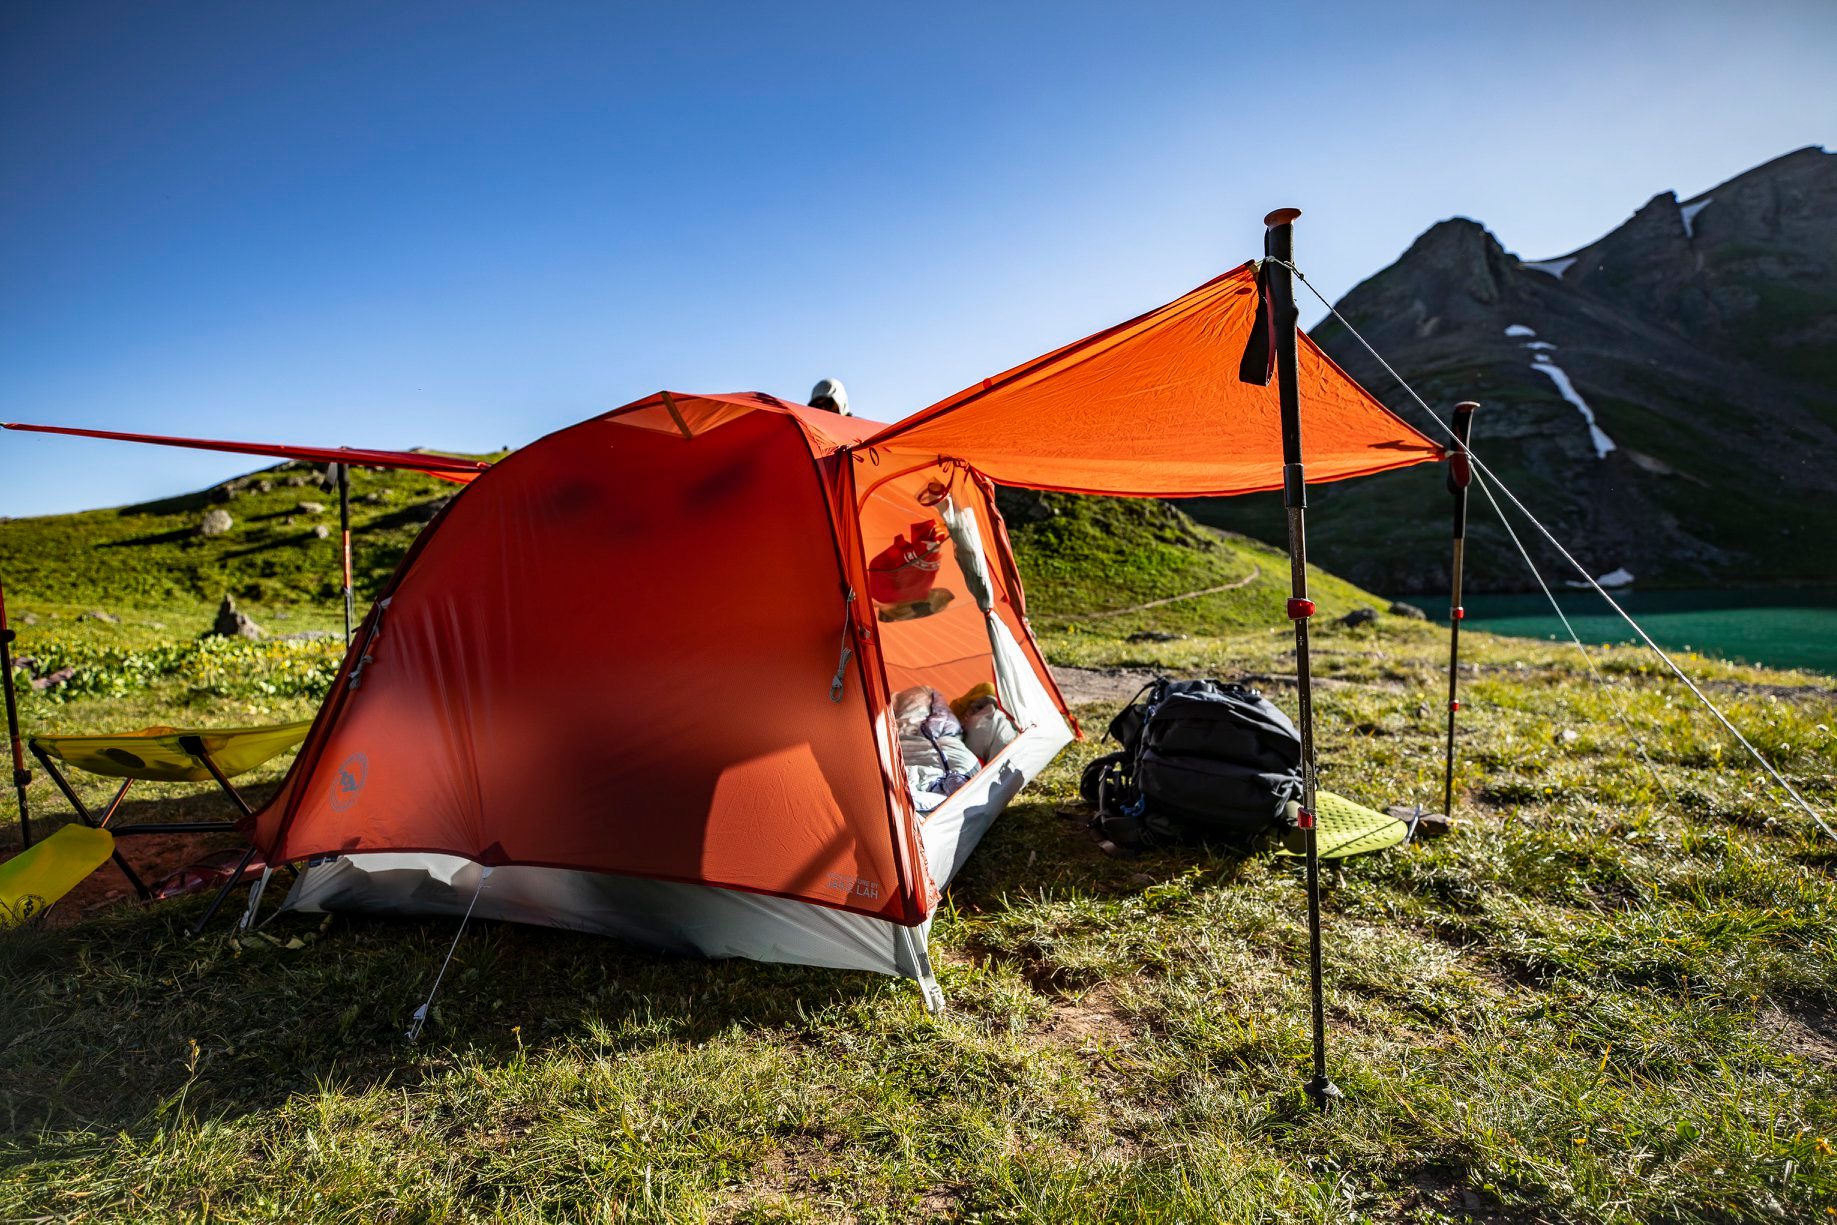 Biig Agnes is one of the best tent brands